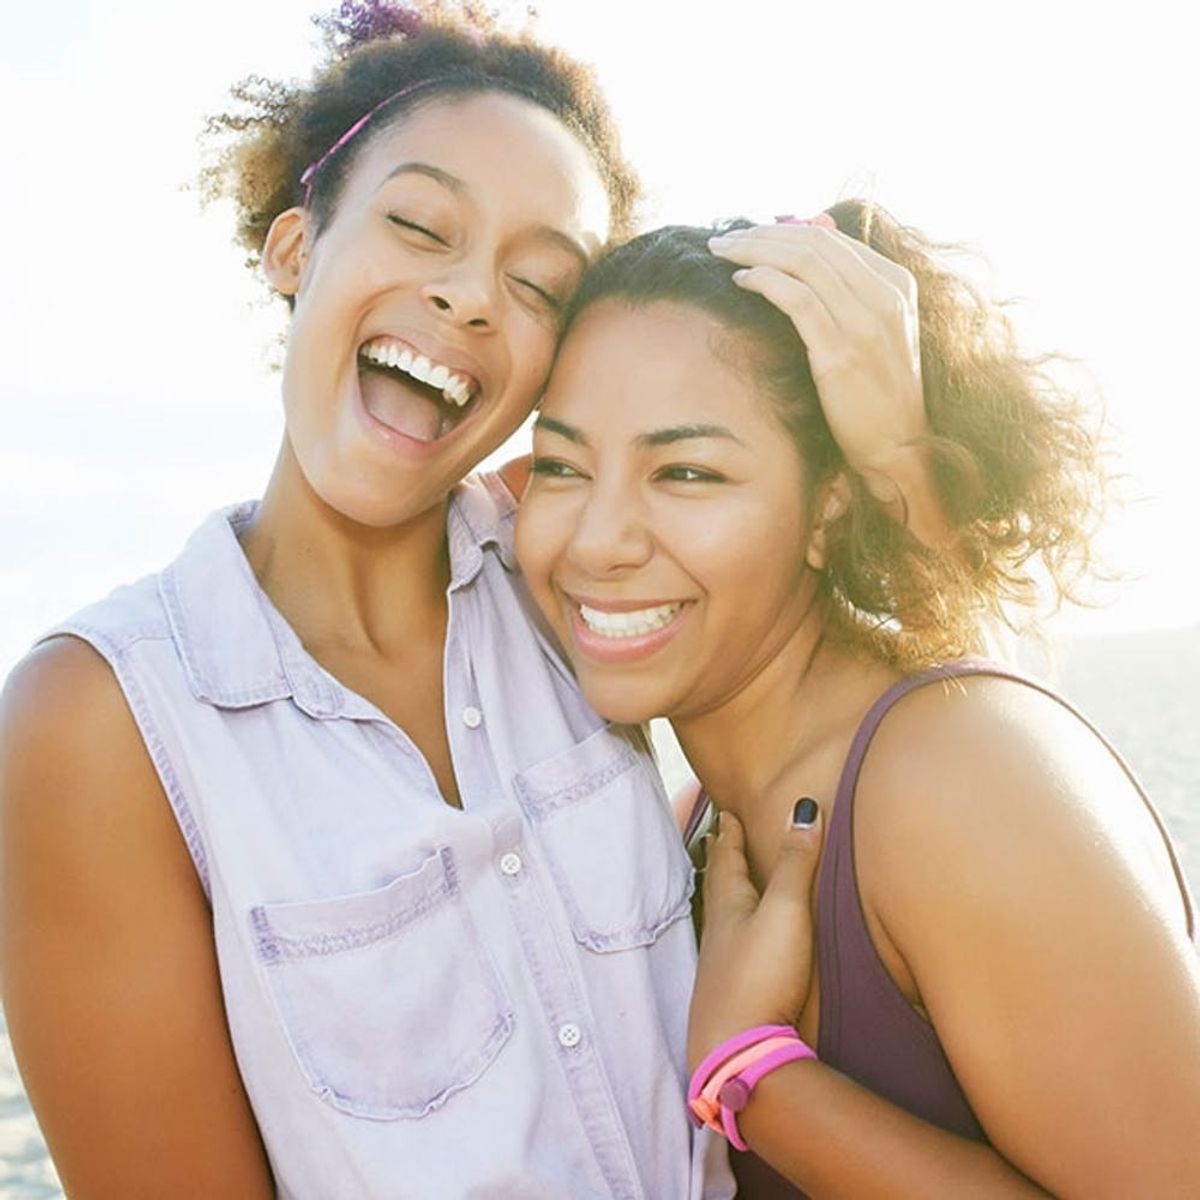 This Is the Most Effective Way to Find Happiness, According to Science